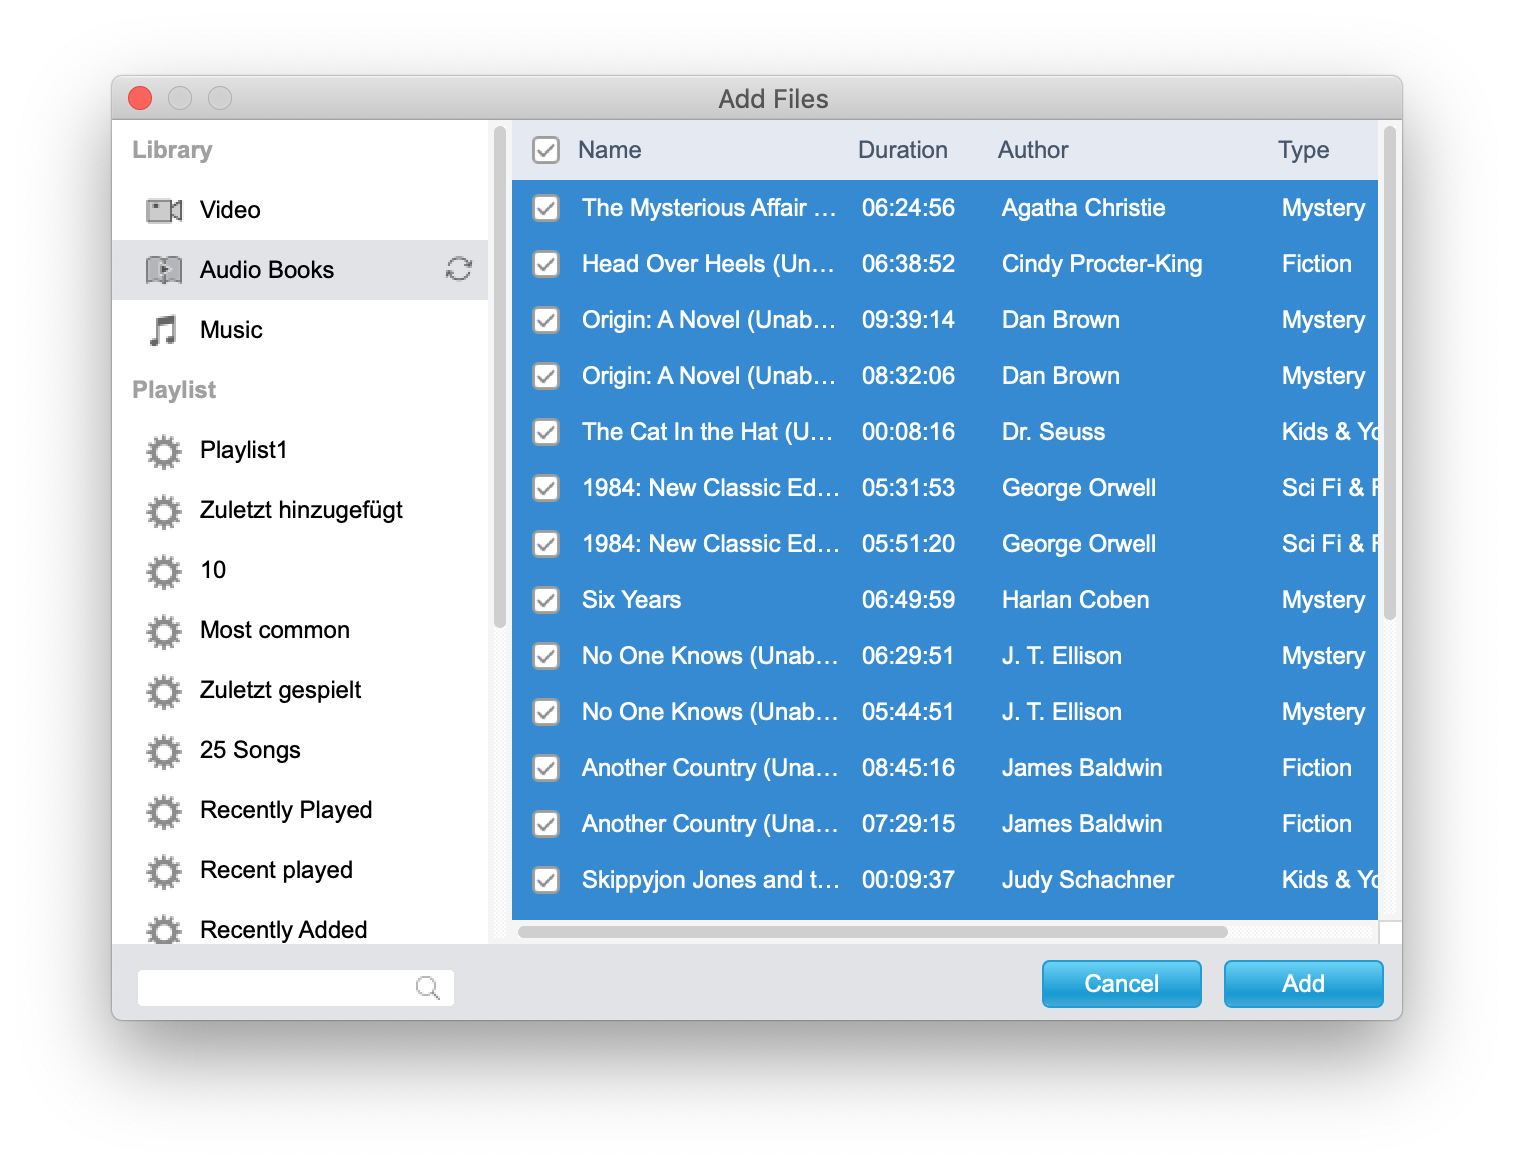 itunes to mp3 converter free remove drm